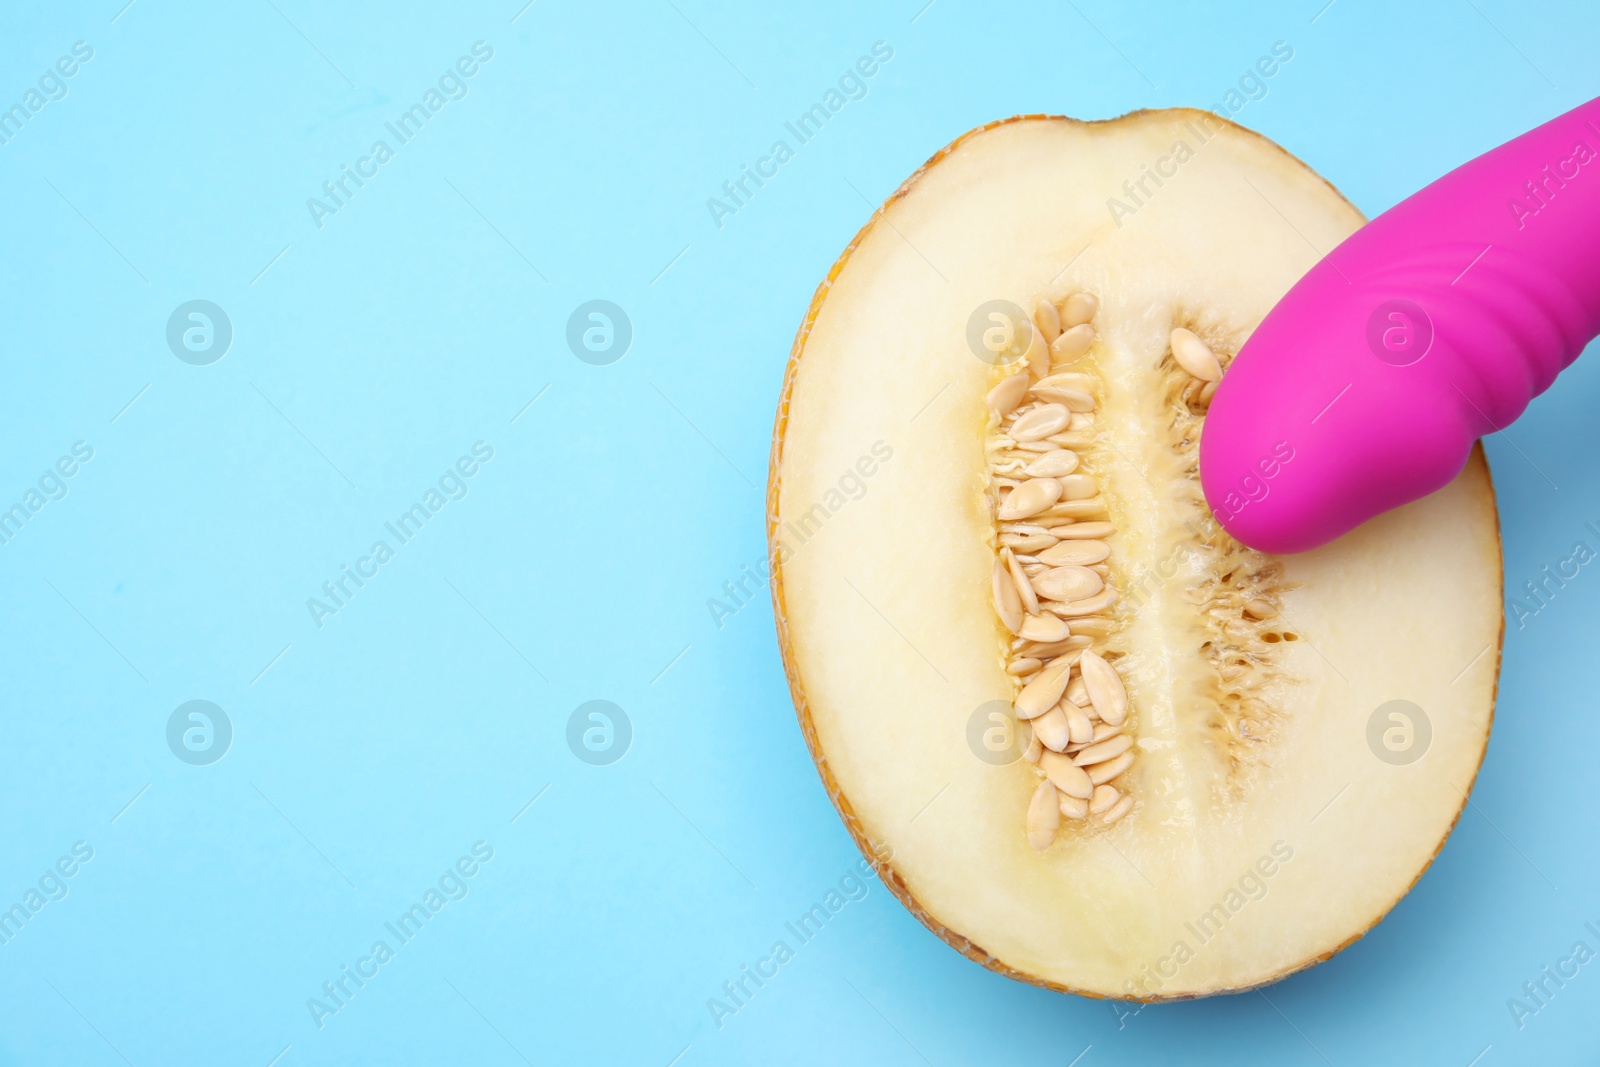 Photo of Half of melon and purple vibrator on blue background, flat lay with space for text. Sex concept